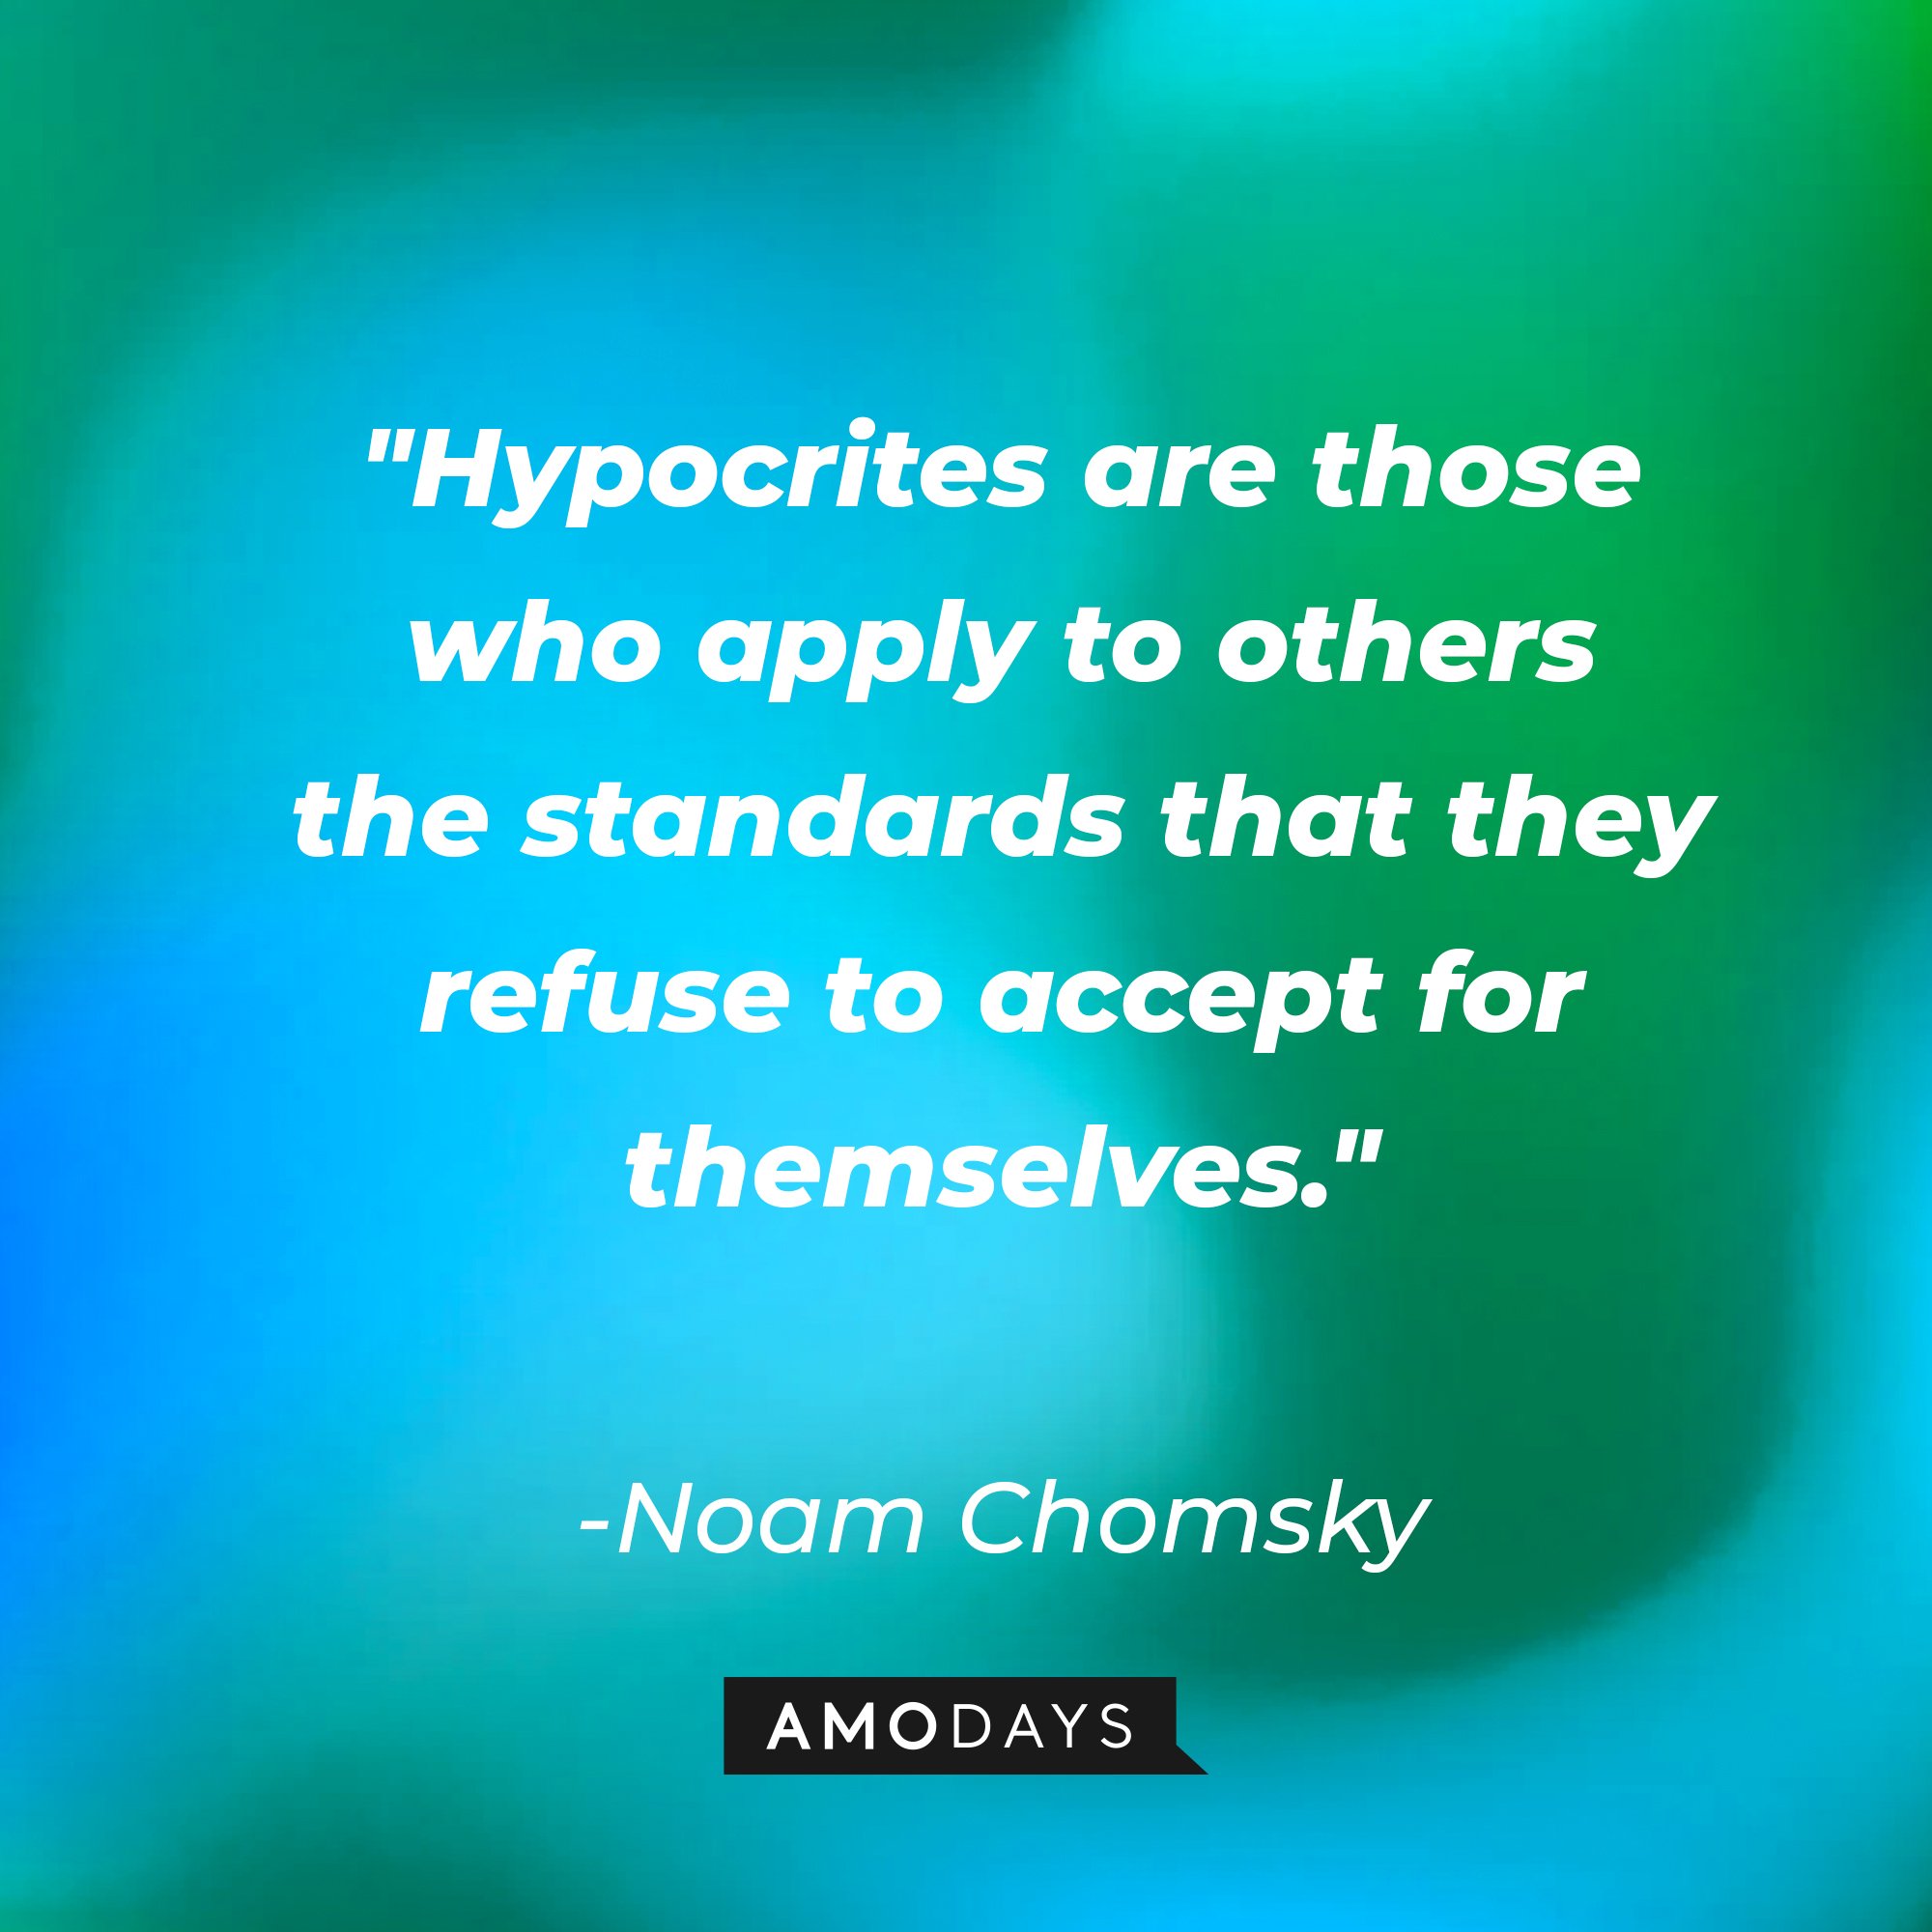 Noam Chomsky's quote:\\\\\\\\\\\\\\\\u00a0"Hypocrites are those who apply to others the standards that they refuse to accept for themselves."\\\\\\\\\\\\\\\\u00a0| Image: AmoDays